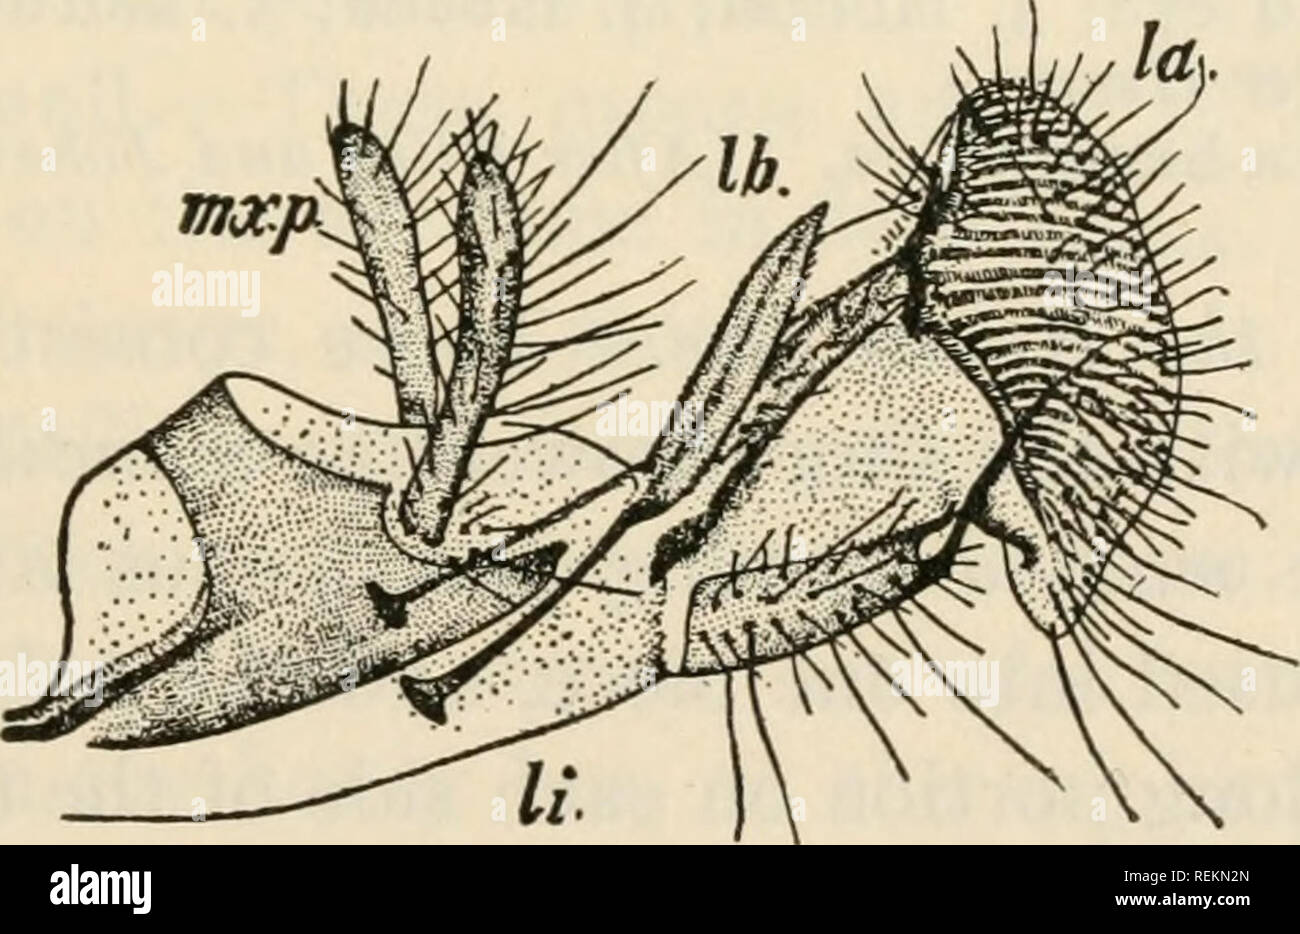 . Class book of economic entomology. Insects, Injurious and beneficial. [from old catalog]; Insects; Insects. Pig. II.—Mouth-parts of female mosquito (Culex pipiens). A, Dorsal aspect; B, transverse section; C, extremity of maxilla; D, extremity of labrum-epi- pharynx; a., antenna; e., compound eye; h., hypopharynx; I., labrum-epipharynx; /*., labium; m., mandible; mx., maxilla; p., maxillary palpus. {After Folsom and Dimmock.). Fig. 12.—Mouth-parts of the house-fly (Musca domestica). lb., Labrum; tnx.p., maxillary palpi; li., labium; la., labellum. {After Kellogg.) Mouth-parts of the Butterfl Stock Photo